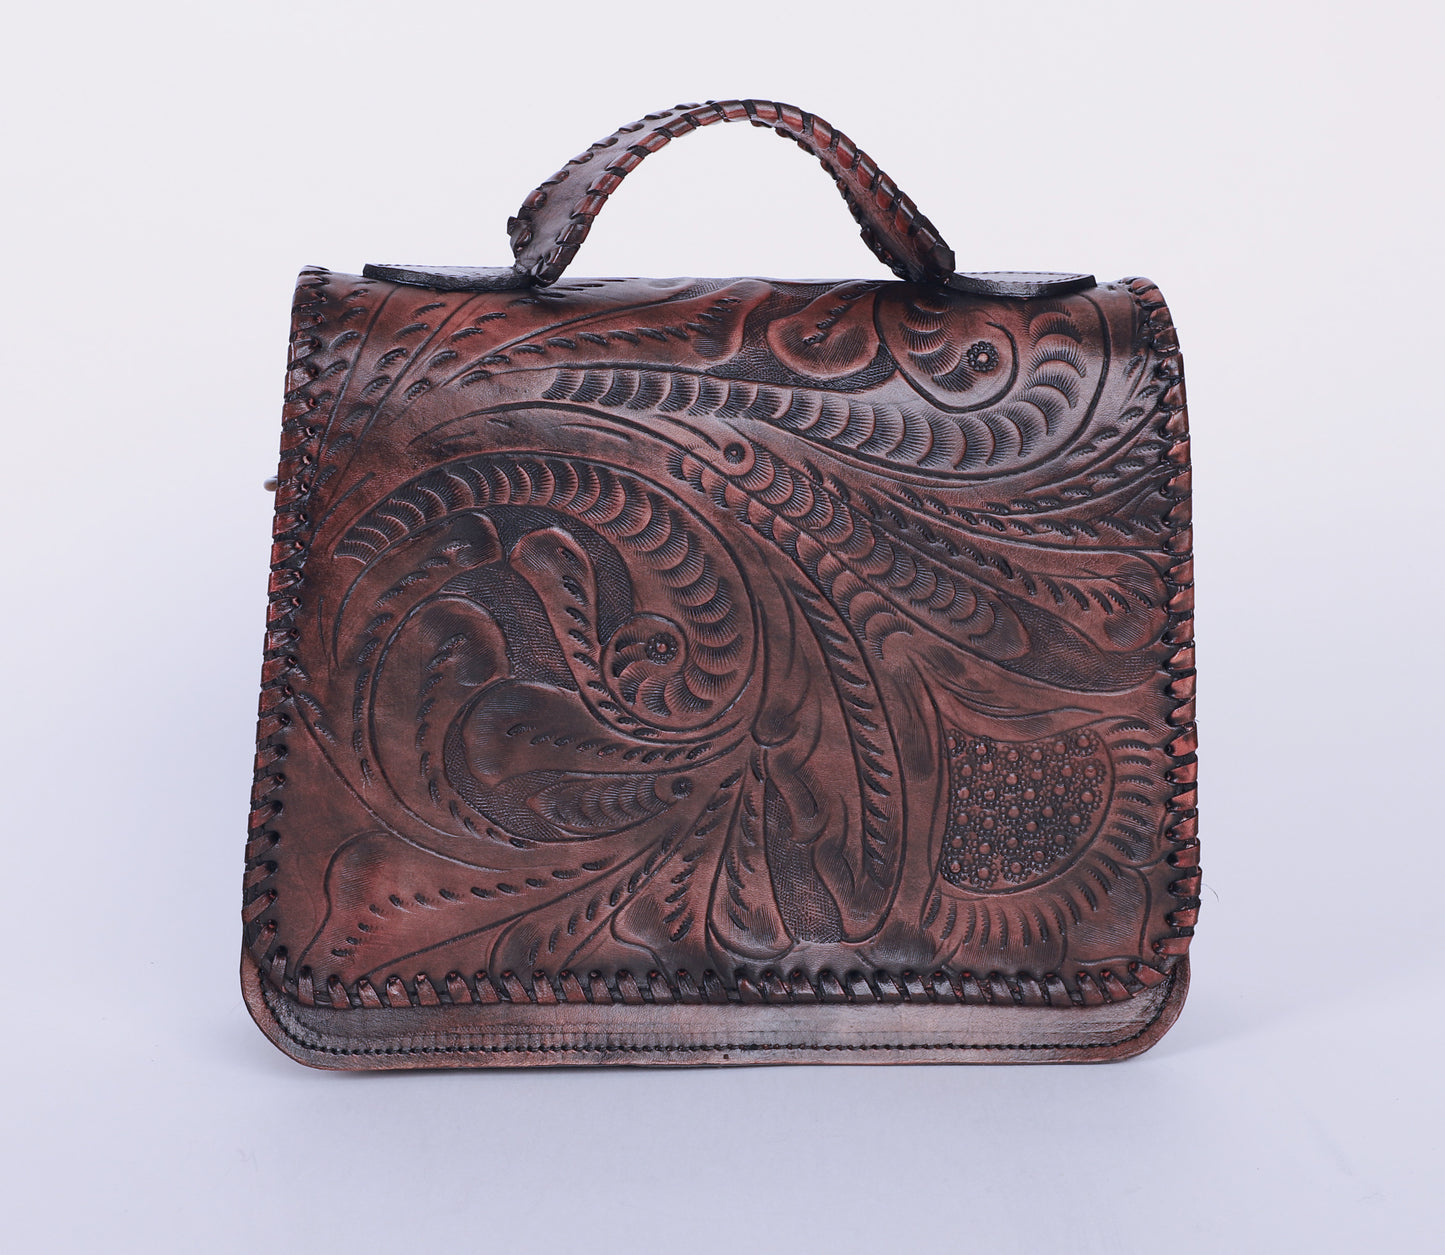 Medium-sized full leather handbag with a traditional mexican etching design on the upper flap. Braided handle on top. Fully lined with suede.  Front view in brown color.